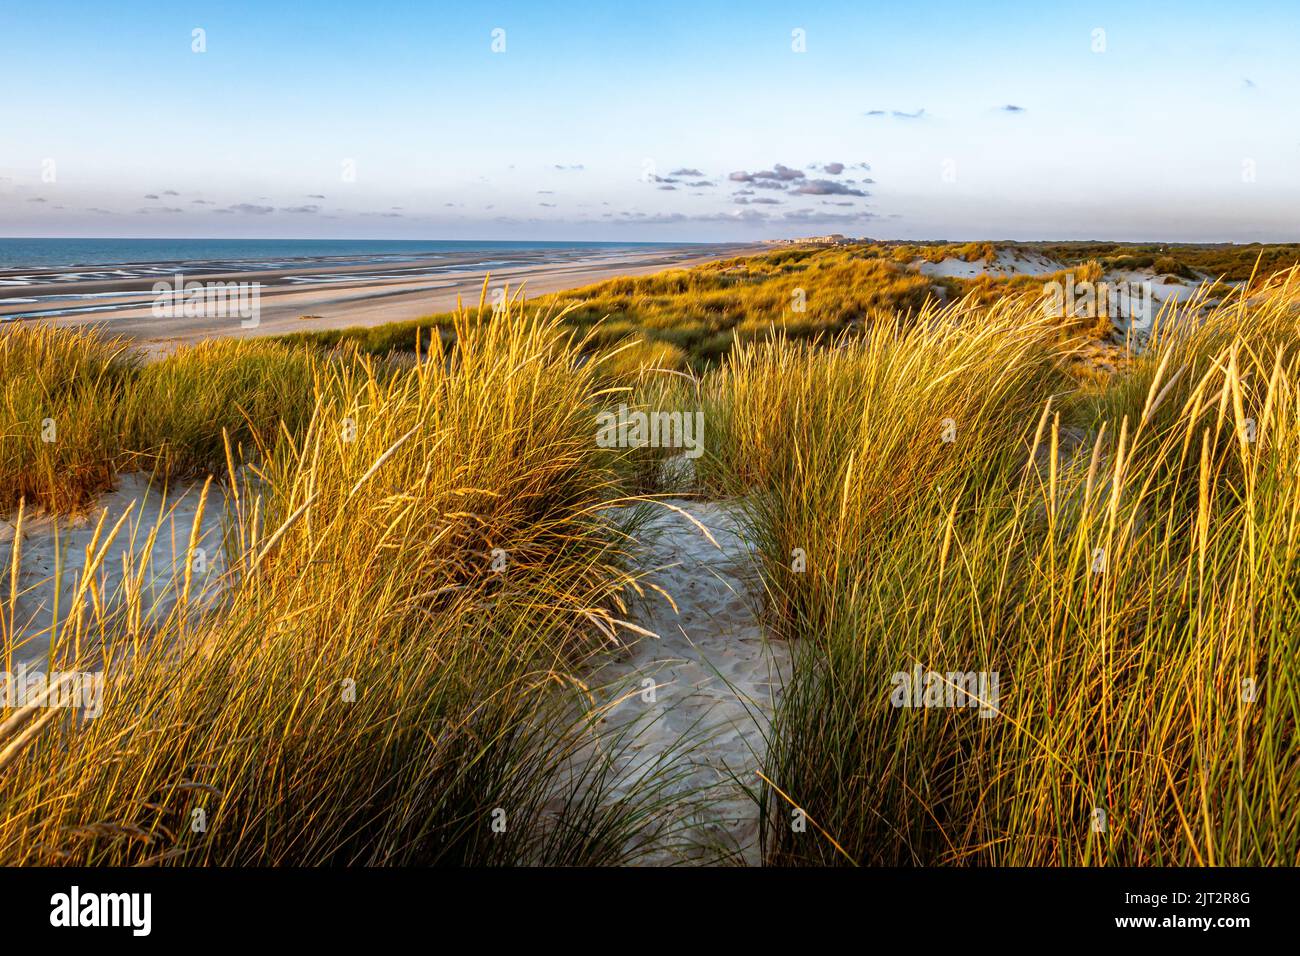 Stunning Seaview with dunes and marram grass in the foreground Stock Photo